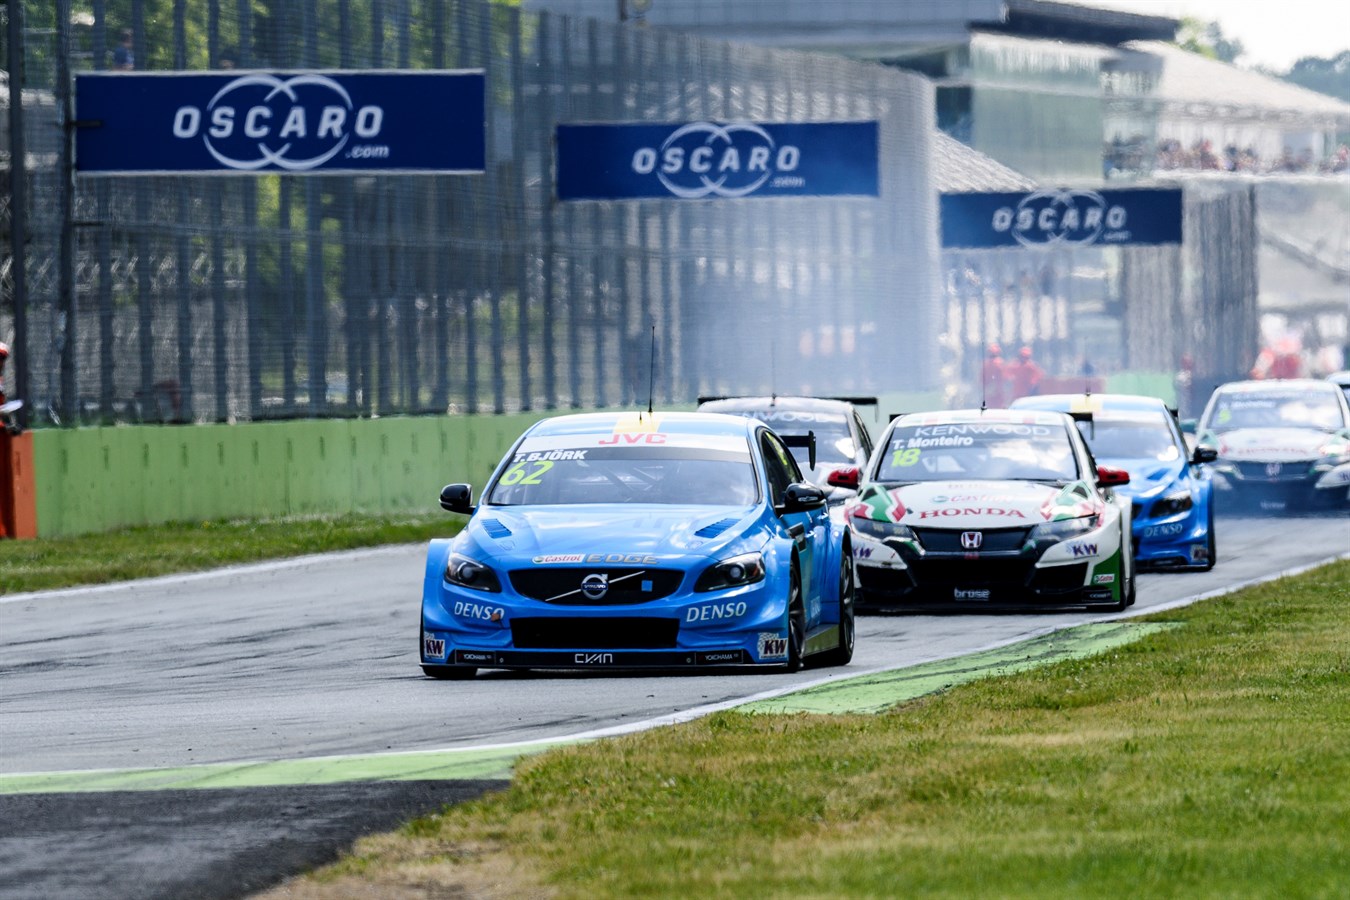 Thed Björk climbs in World Championship standings with superior victory at Monza